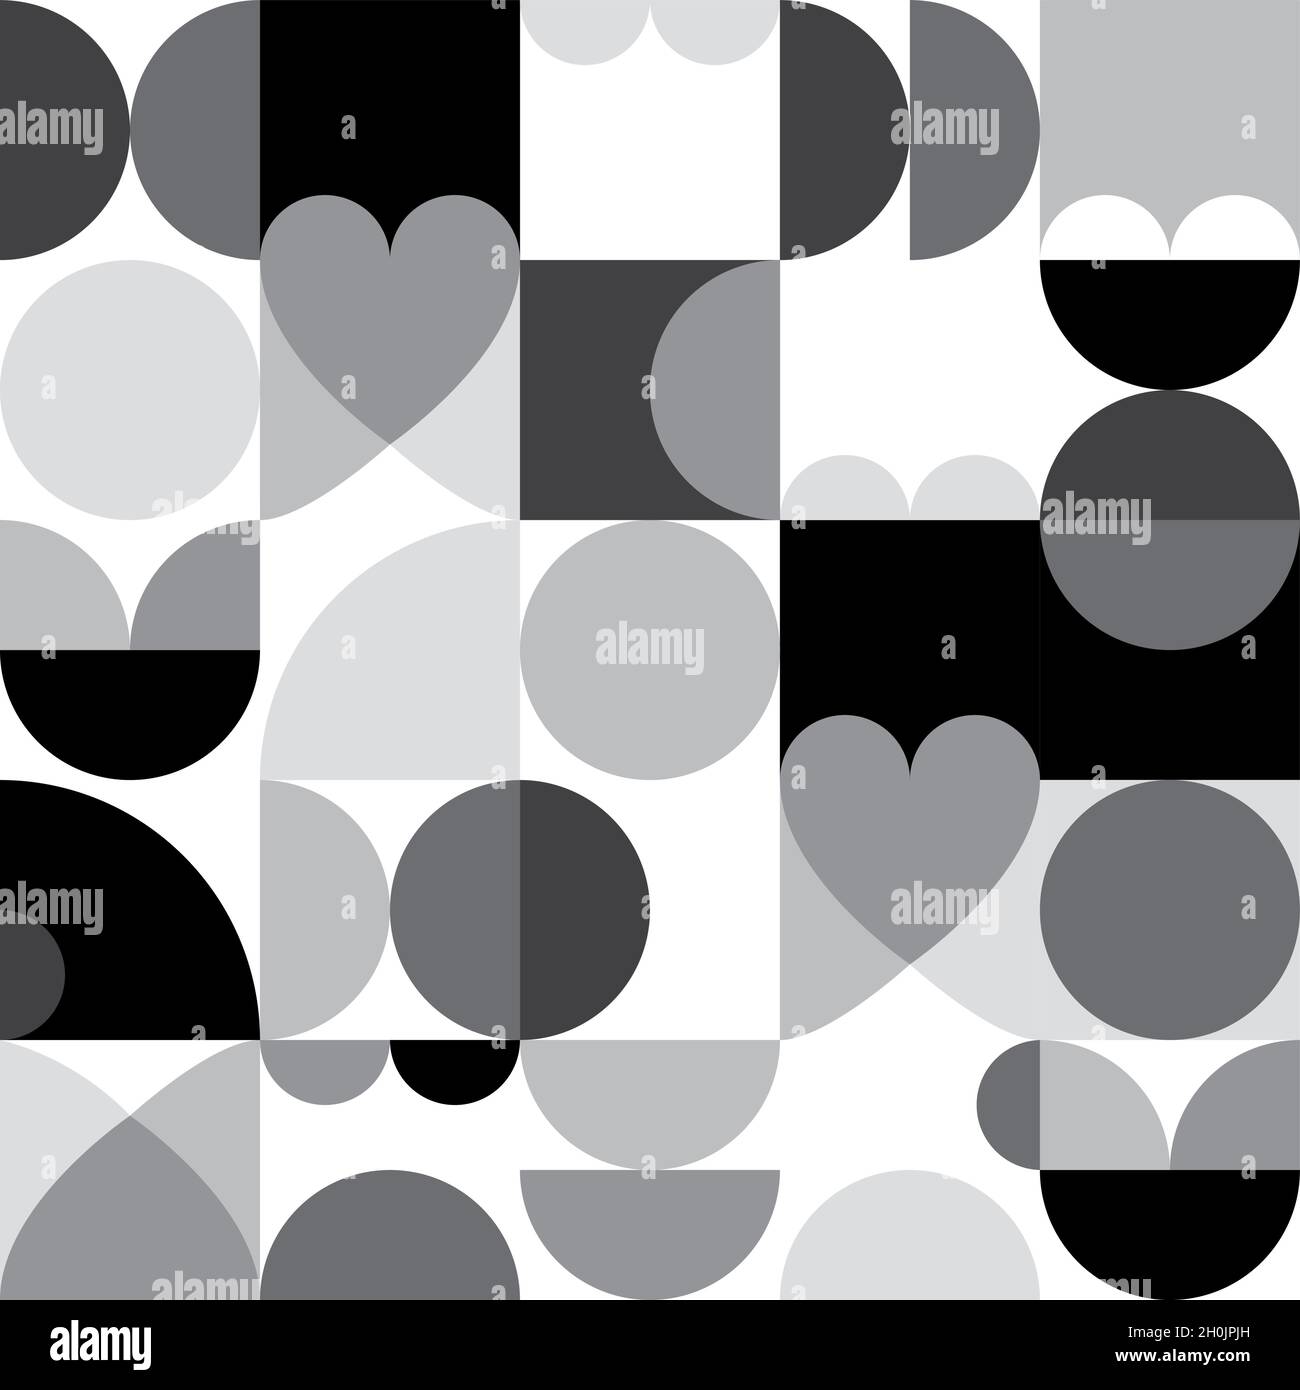 Mid-century modern 60's and 70's style vector seamles pattern - retro minimalist geometric textile or fabric print with hearts in black and white Stock Vector